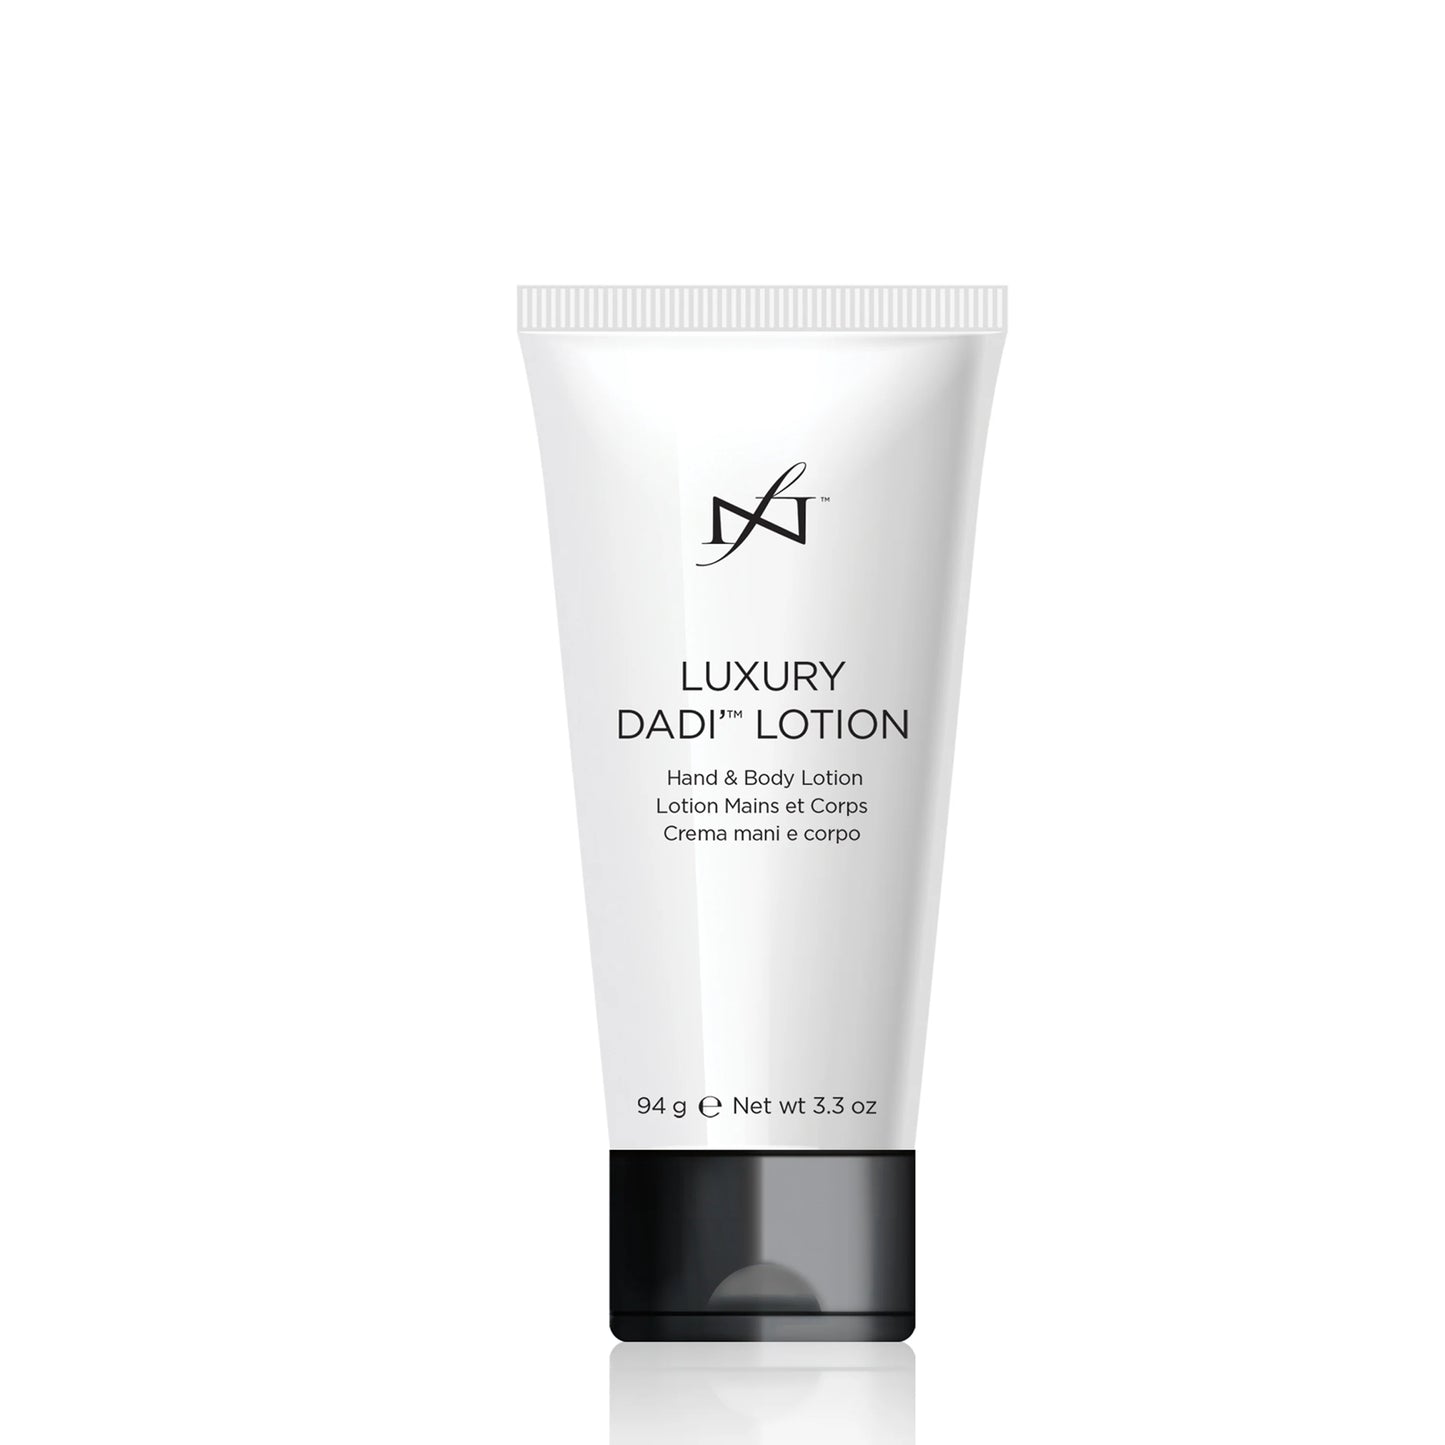 Luxury Dadi' Lotion | Famous Names Products